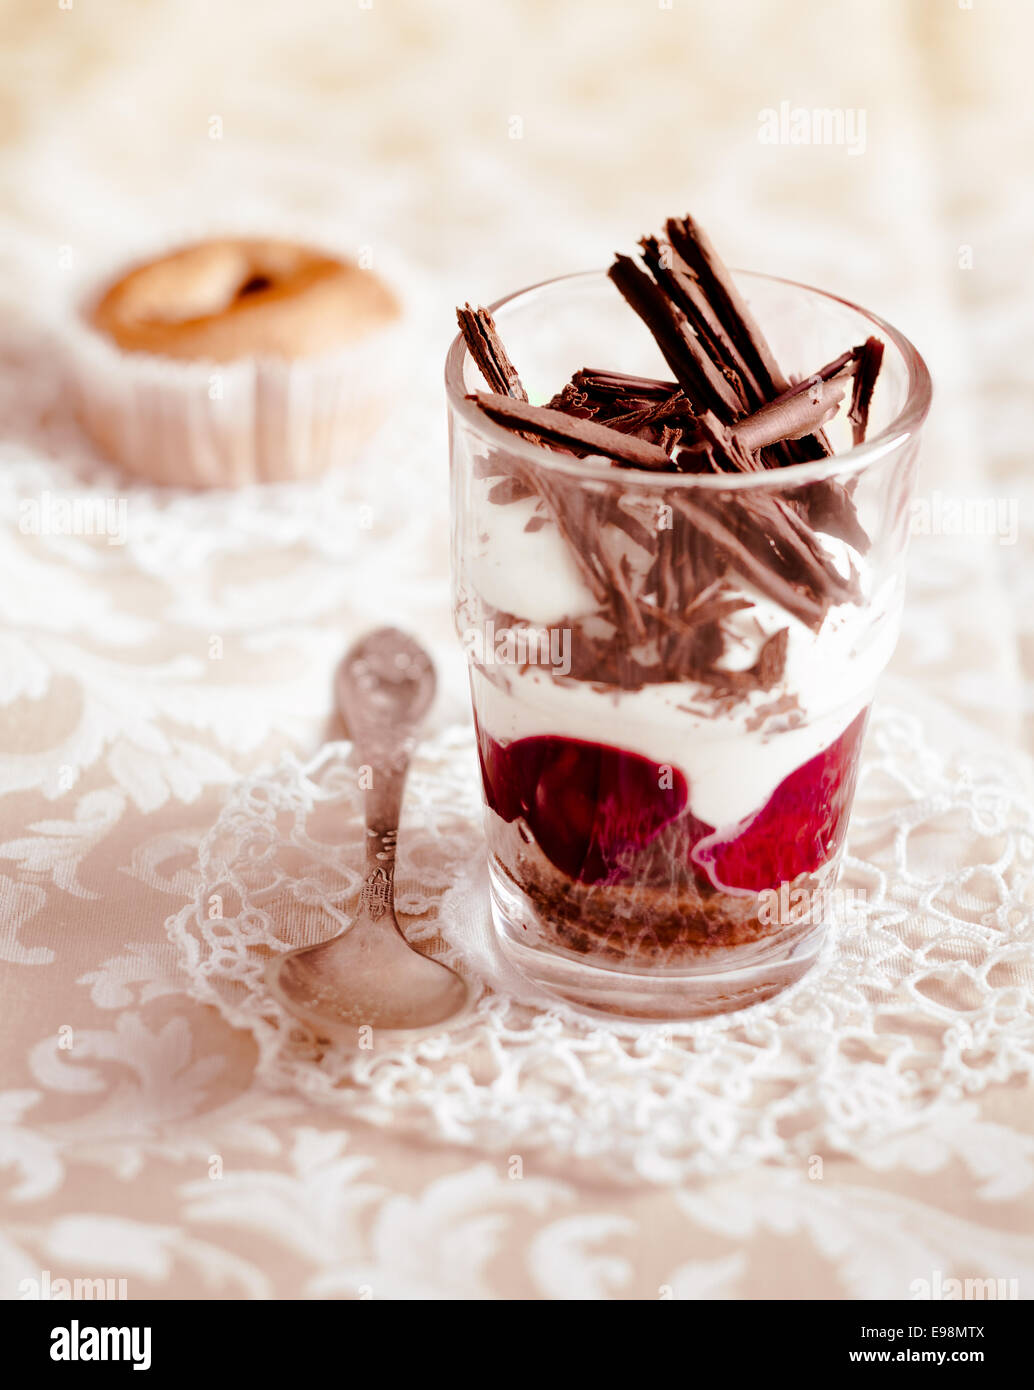 Gourmet fruit and cream parfait topped with chocolate shavings and served in a clear glass on a decorative doily Stock Photo